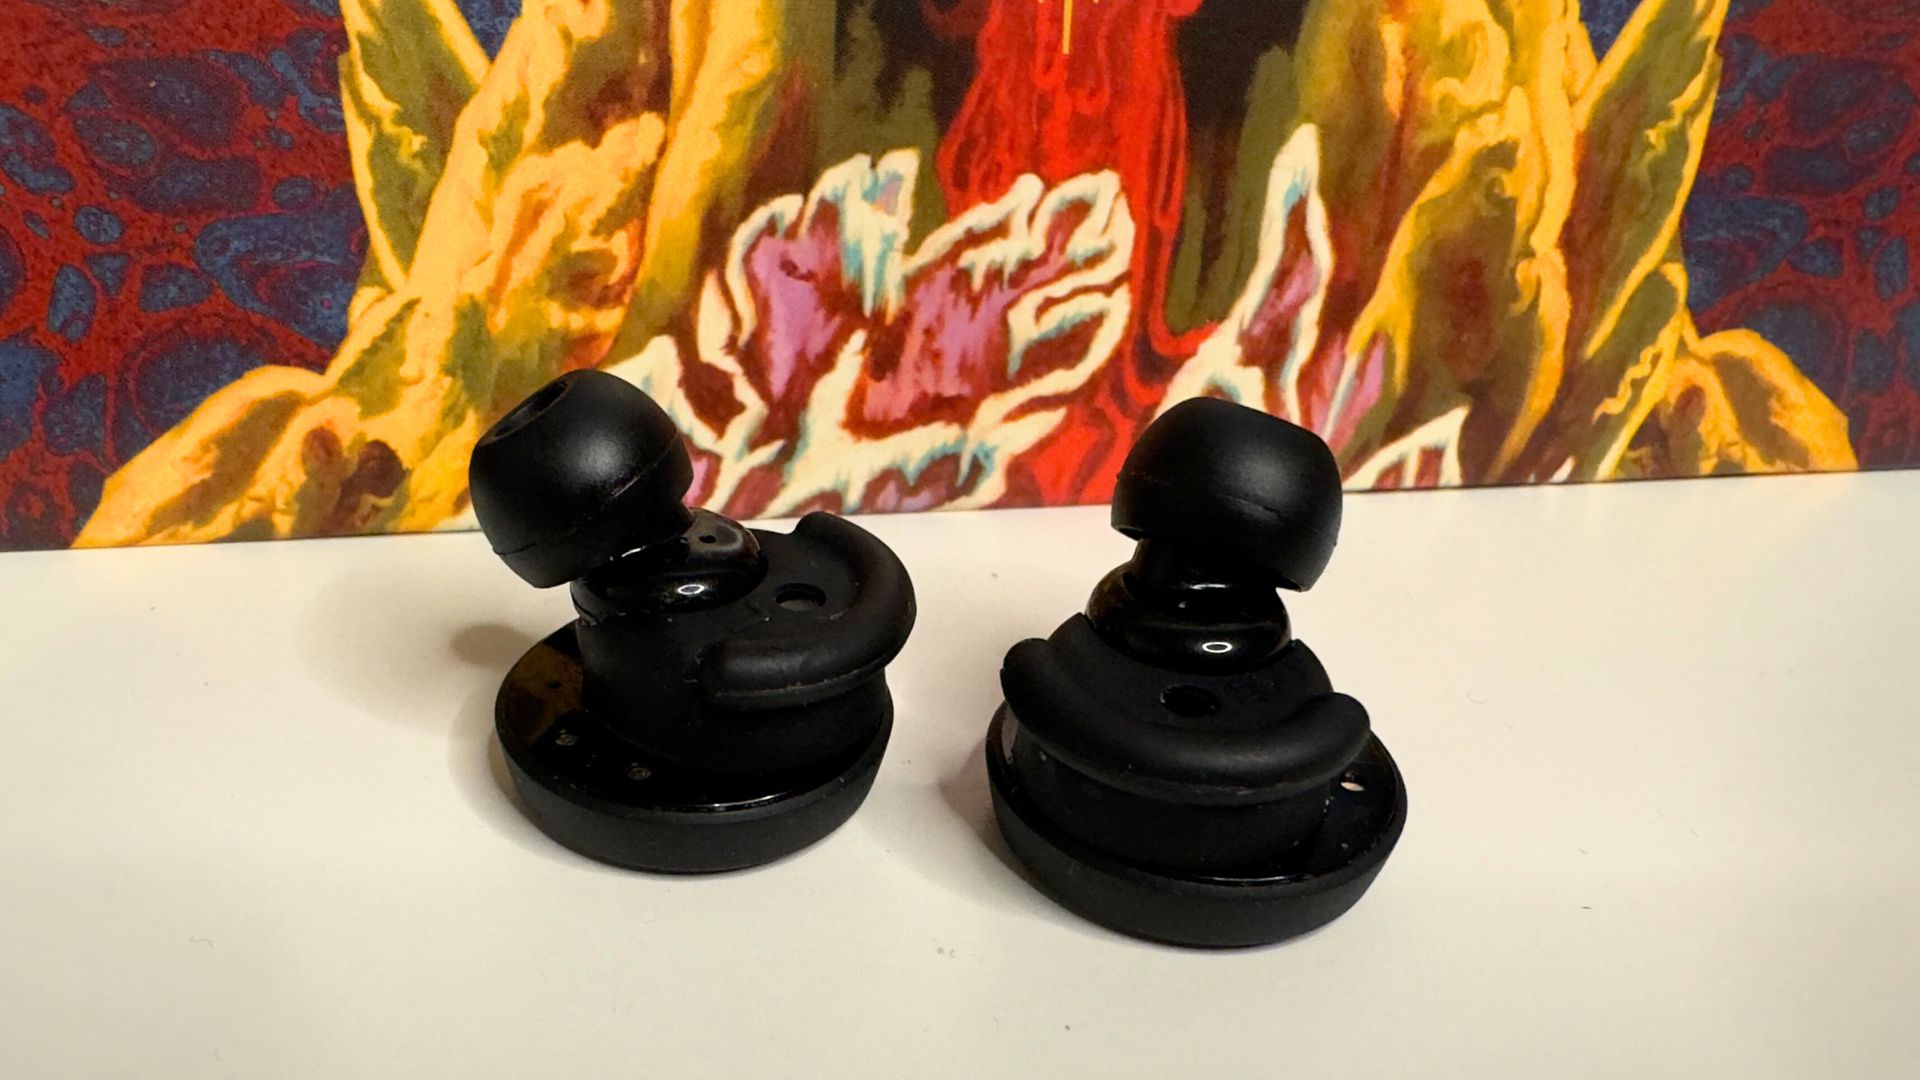 Denon PerL earbuds side by side in front of a record